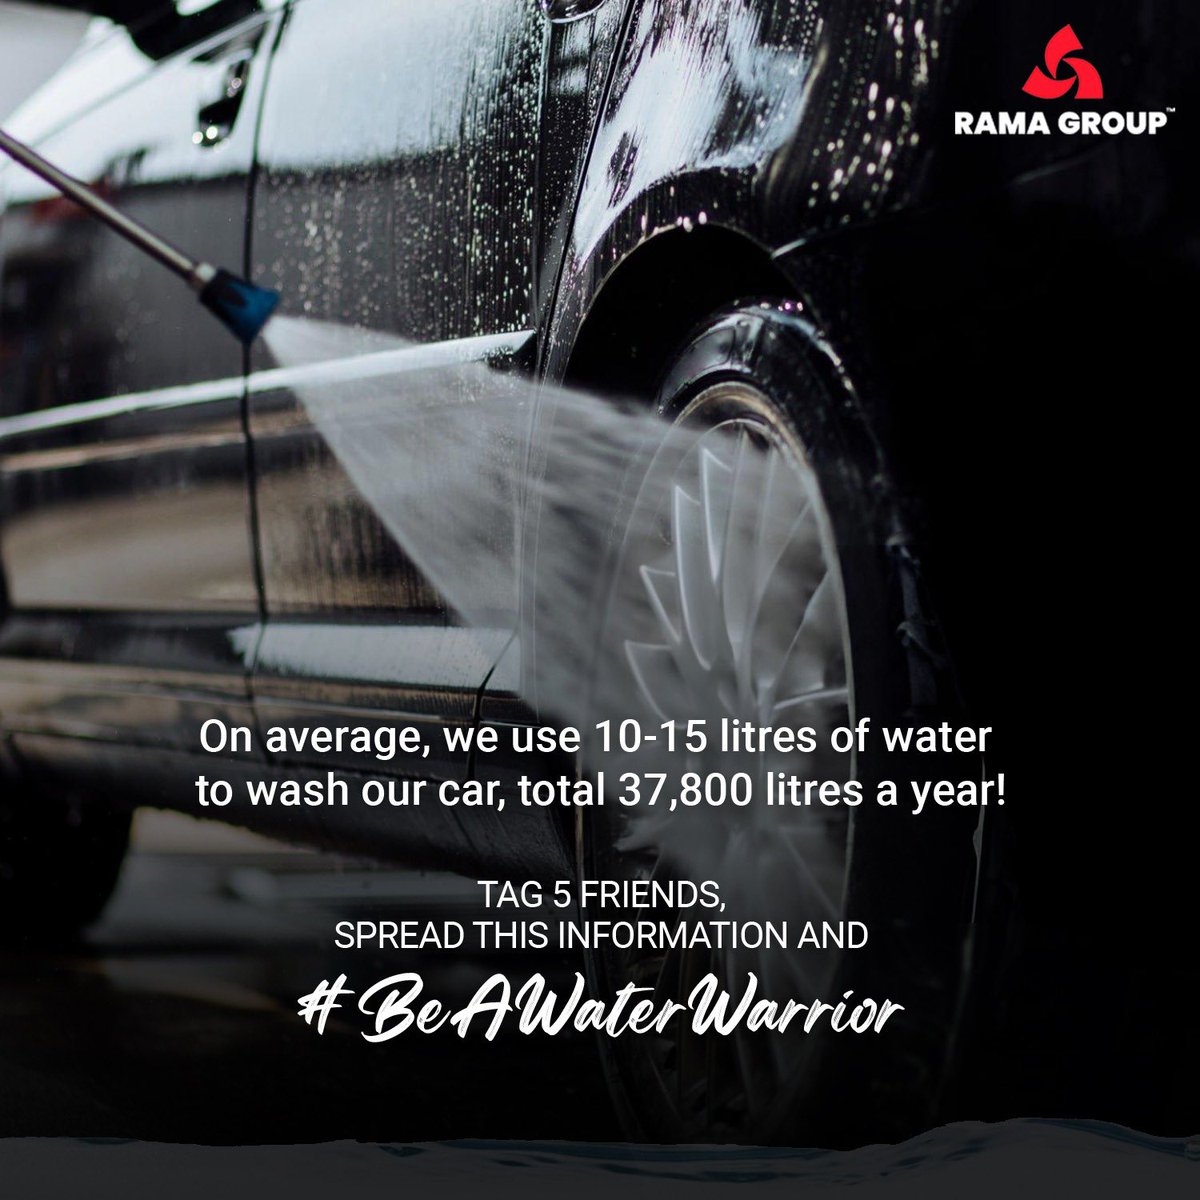 #BeAWaterWarrior Wash your car using a bucket and sponge instead of a hose. You can use a hose with a shut-off nozzle for rinsing only. This is important information and we want you to spread this. Tag 5 friends, spread this information and win Amazon Voucher.